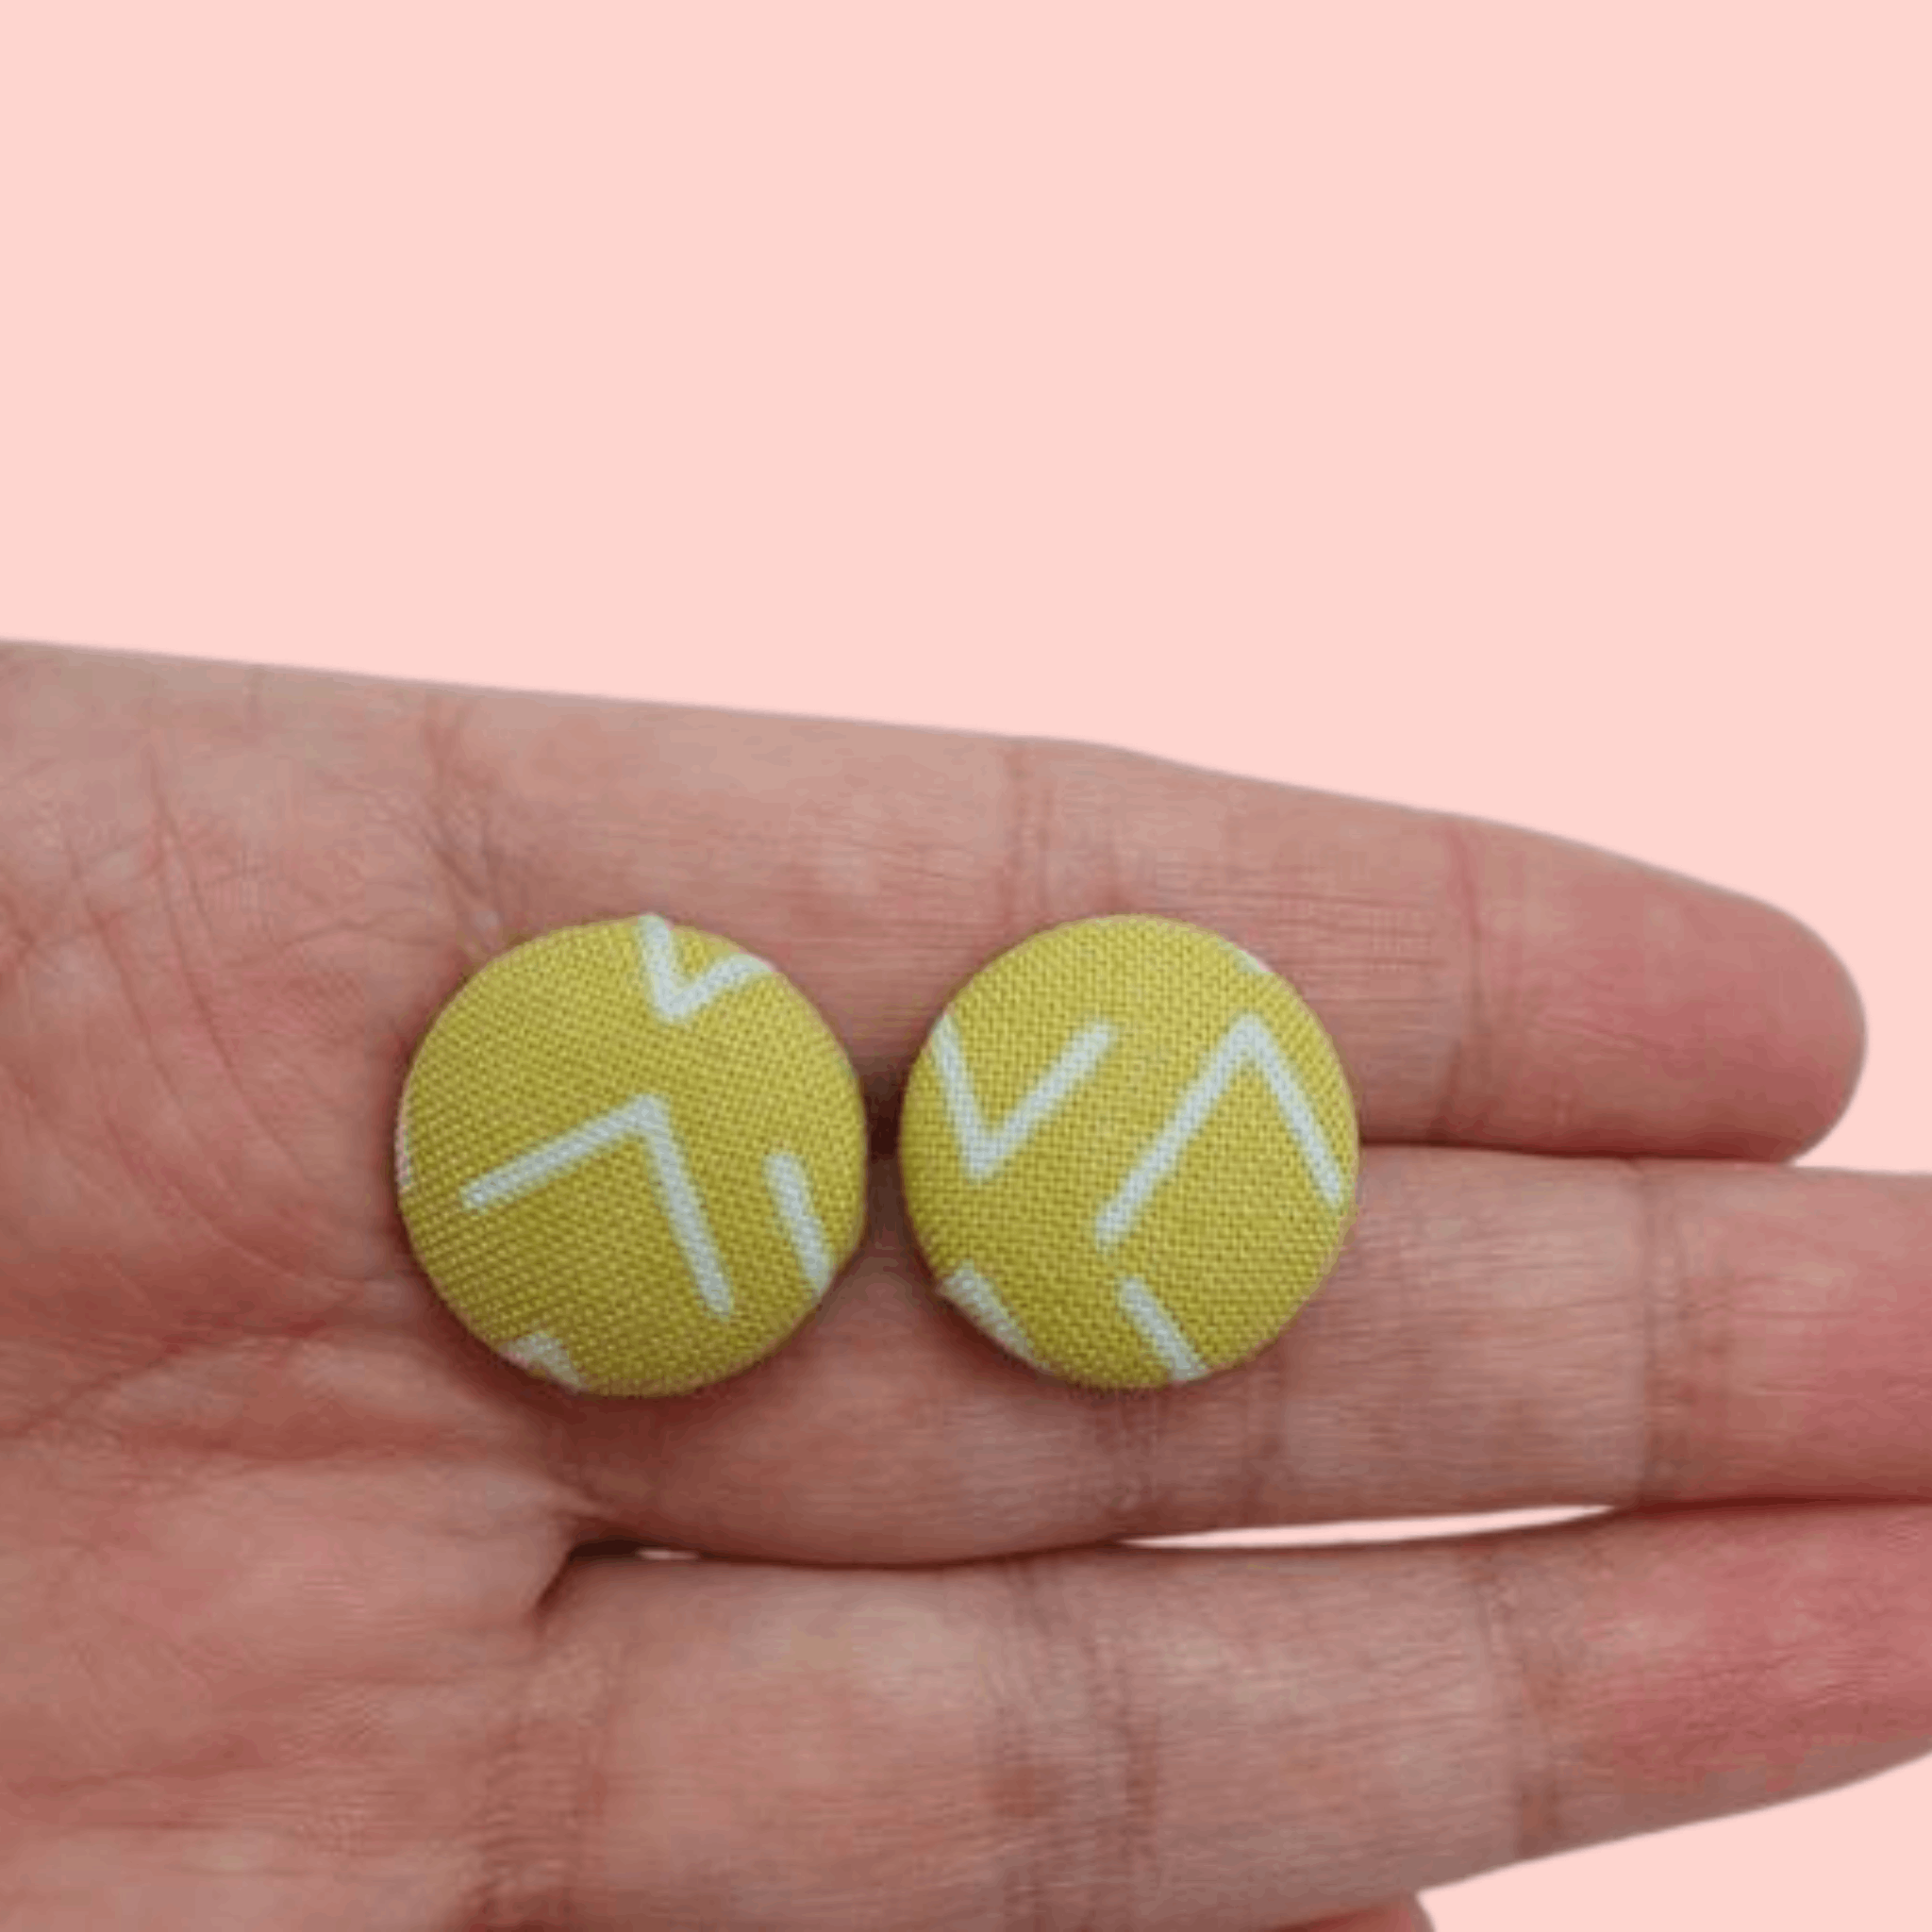 Green and white arrow button studs.